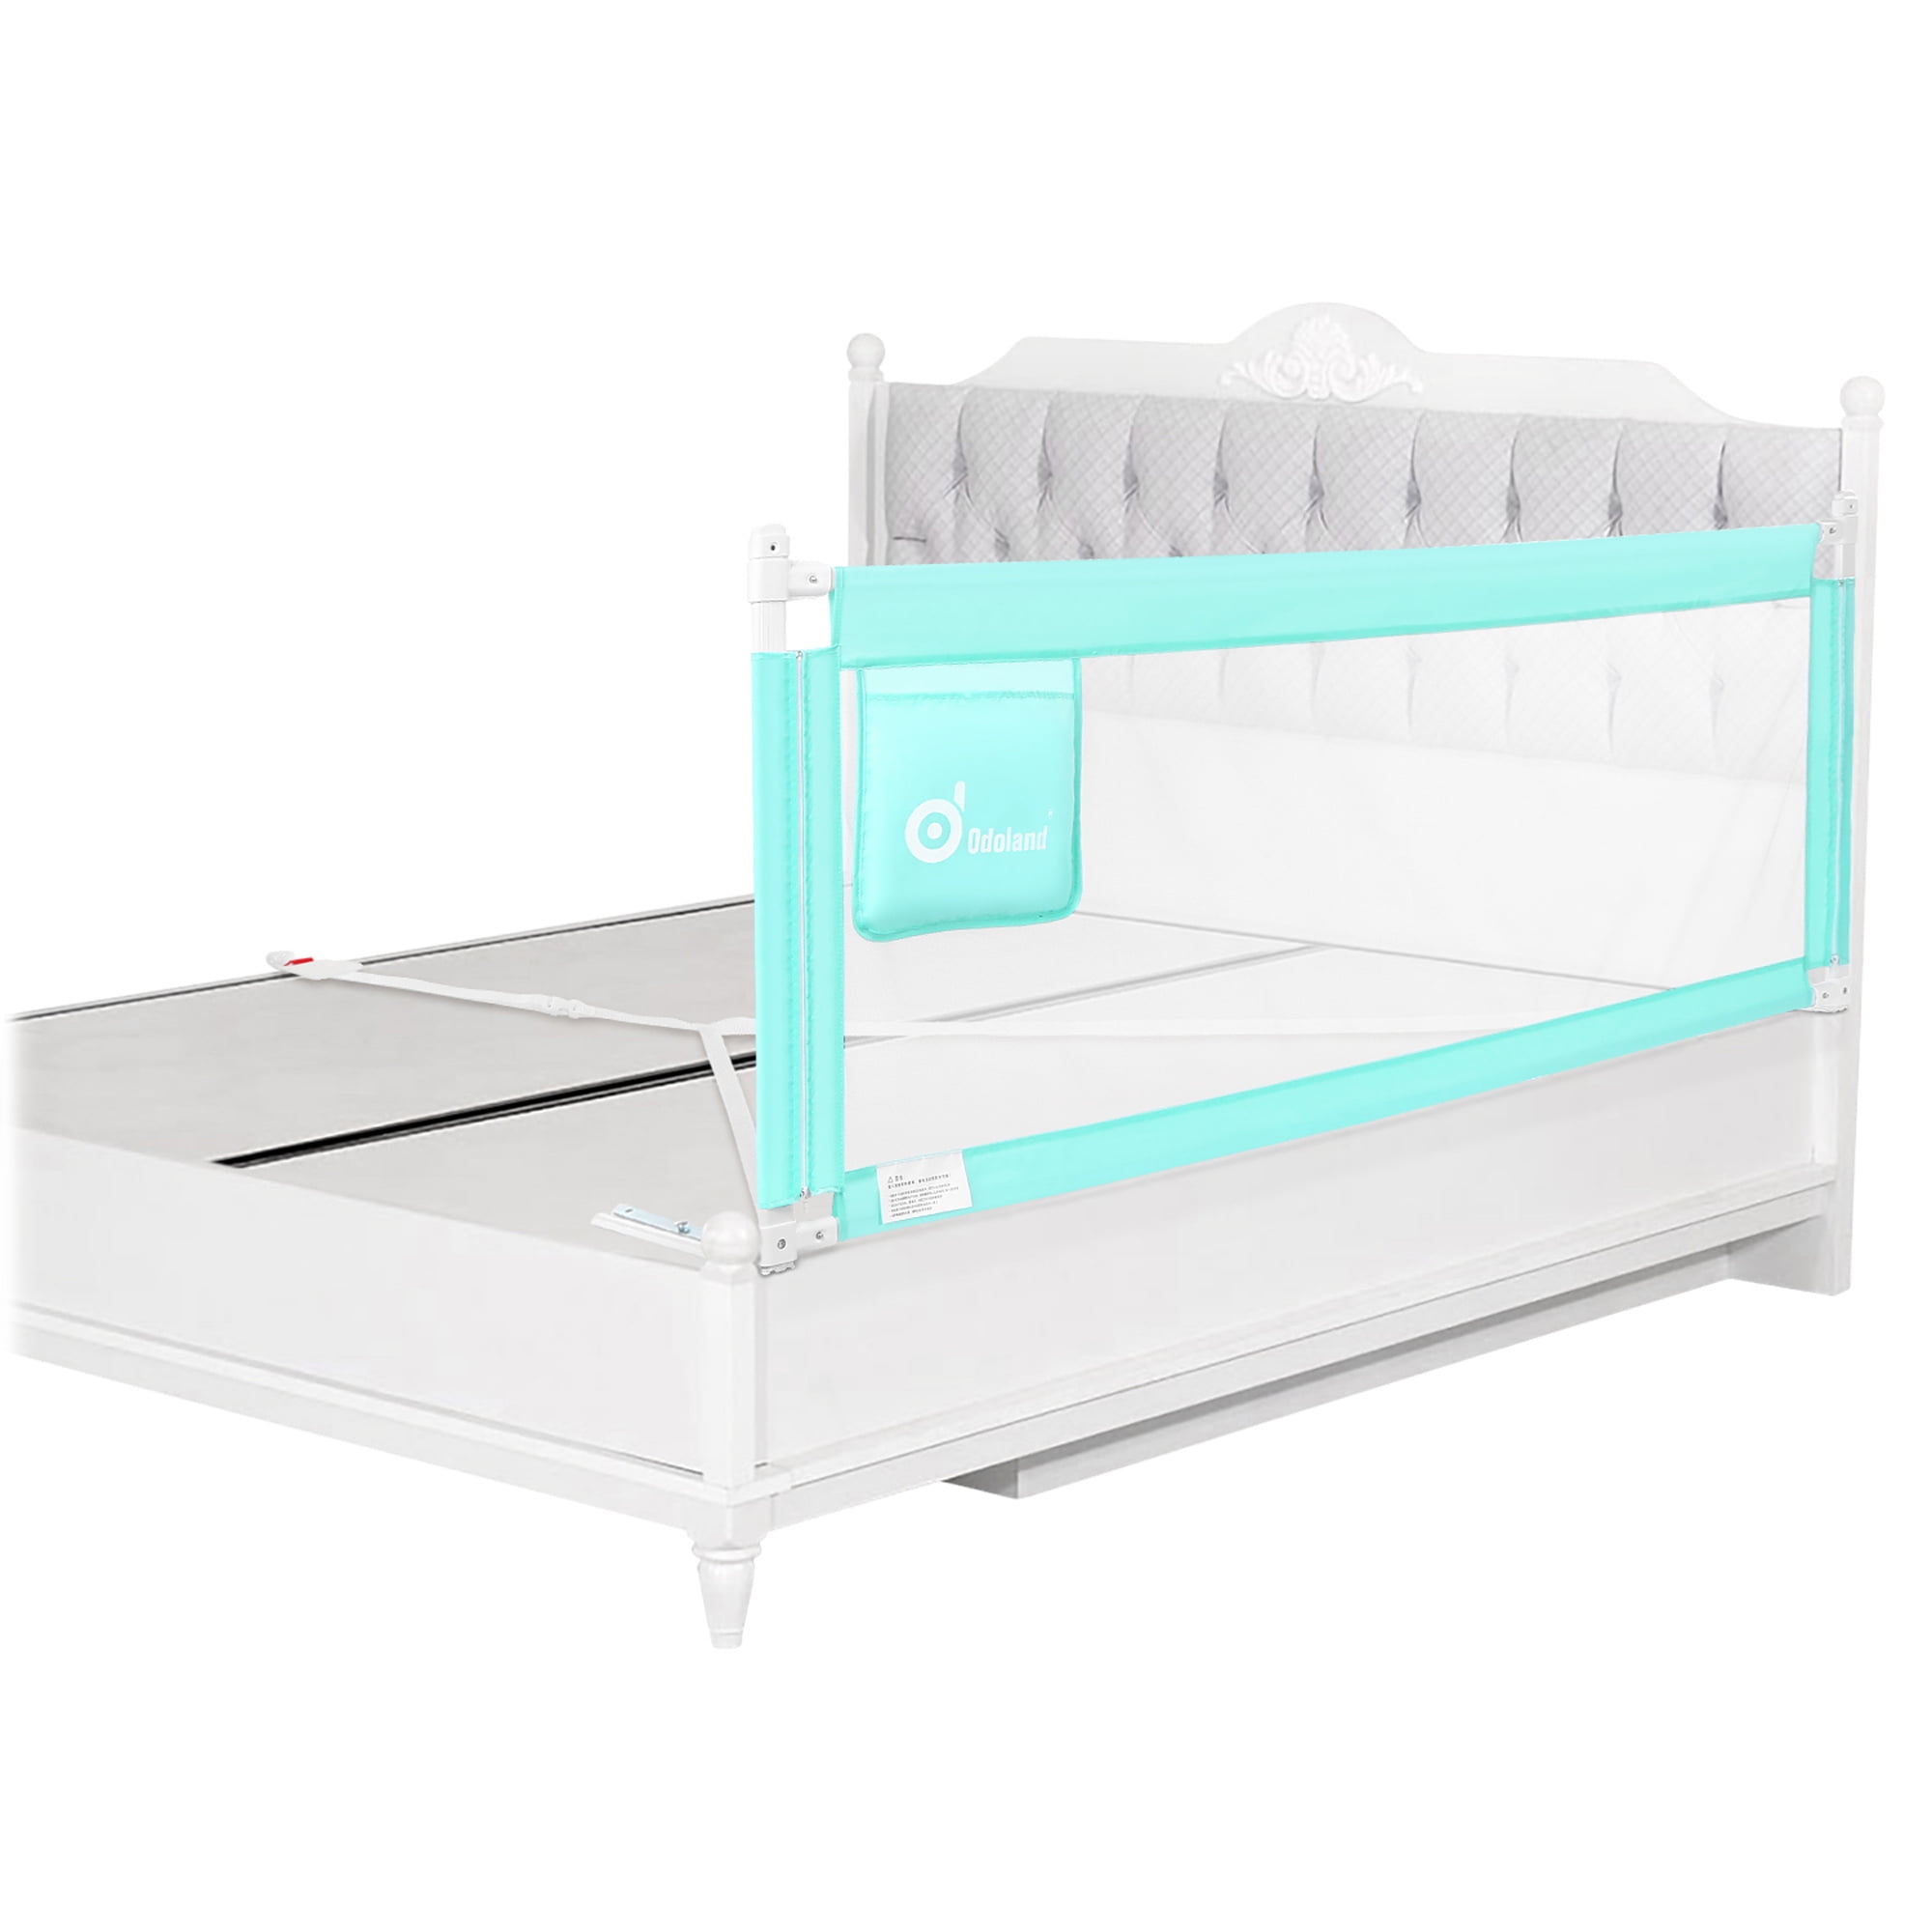 Bed Rails for Toddlers Extra Long Twin Full Queen King Size Baby Infants Safety Guardrail with Reinforce Anchor Safety System 1 Side 58Lx27H 